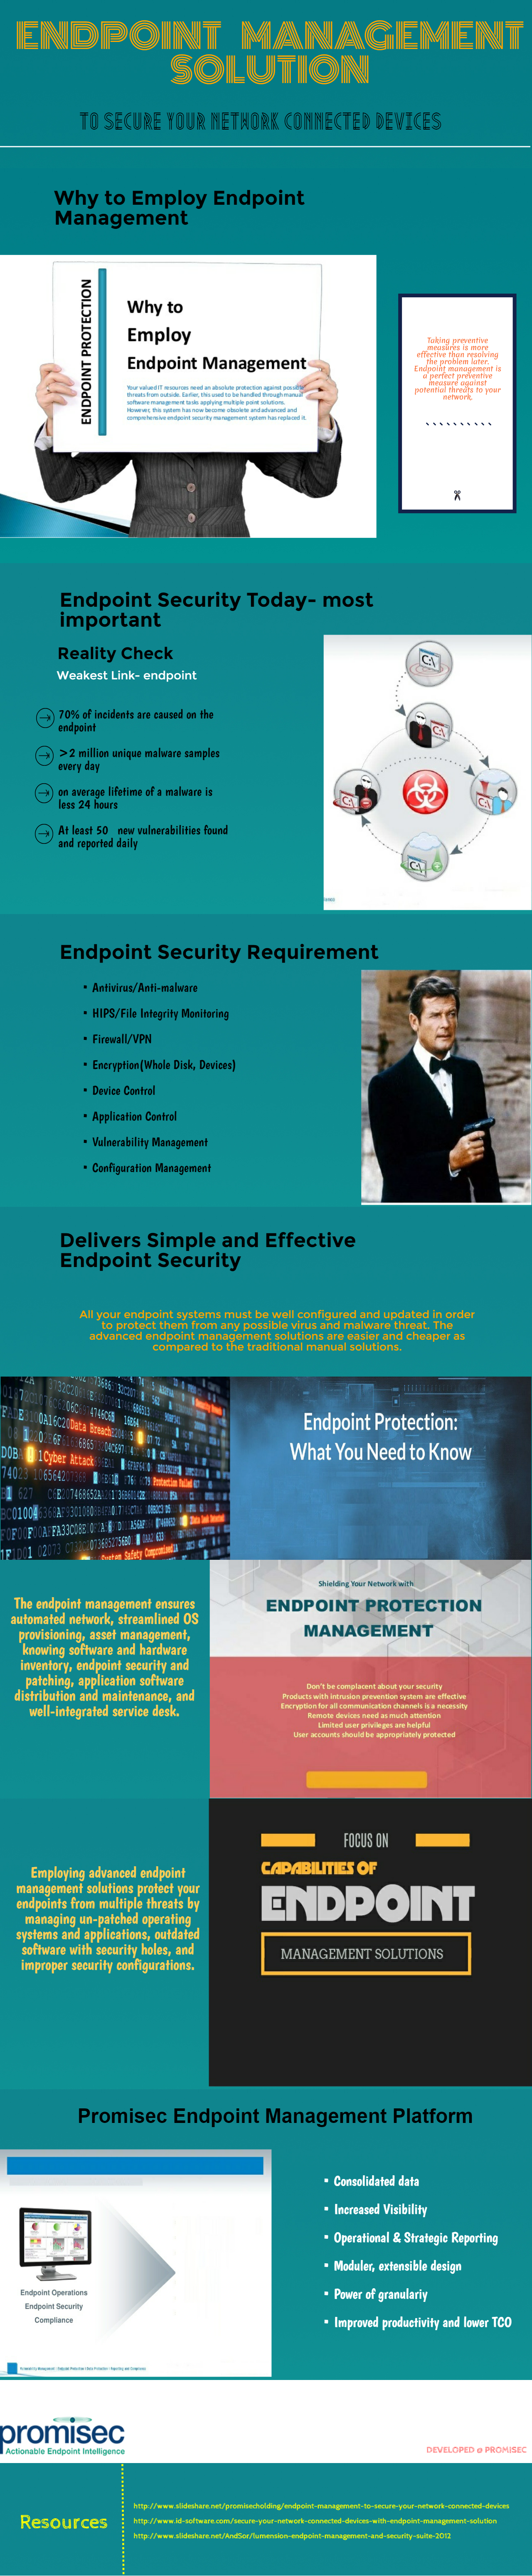 endpoint-management-to-secure-your-network-connected-devices